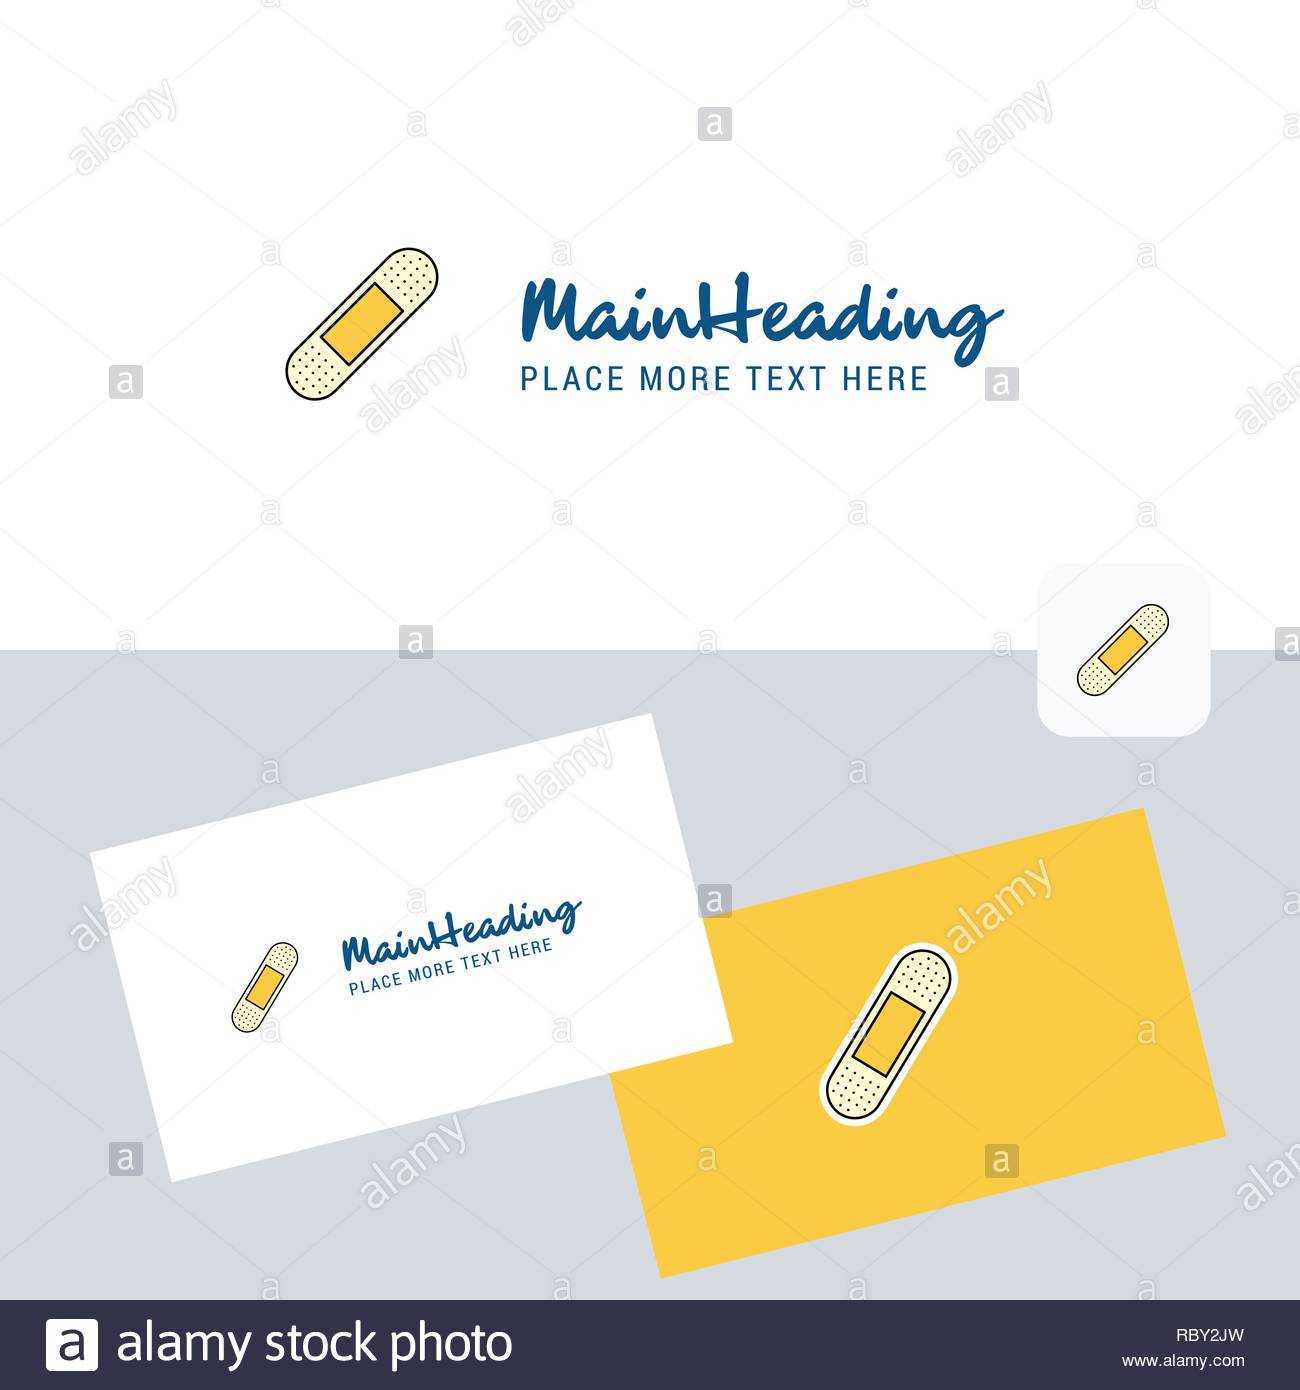 Plaster Vector Logotype With Business Card Template. Elegant Regarding Plastering Business Cards Templates